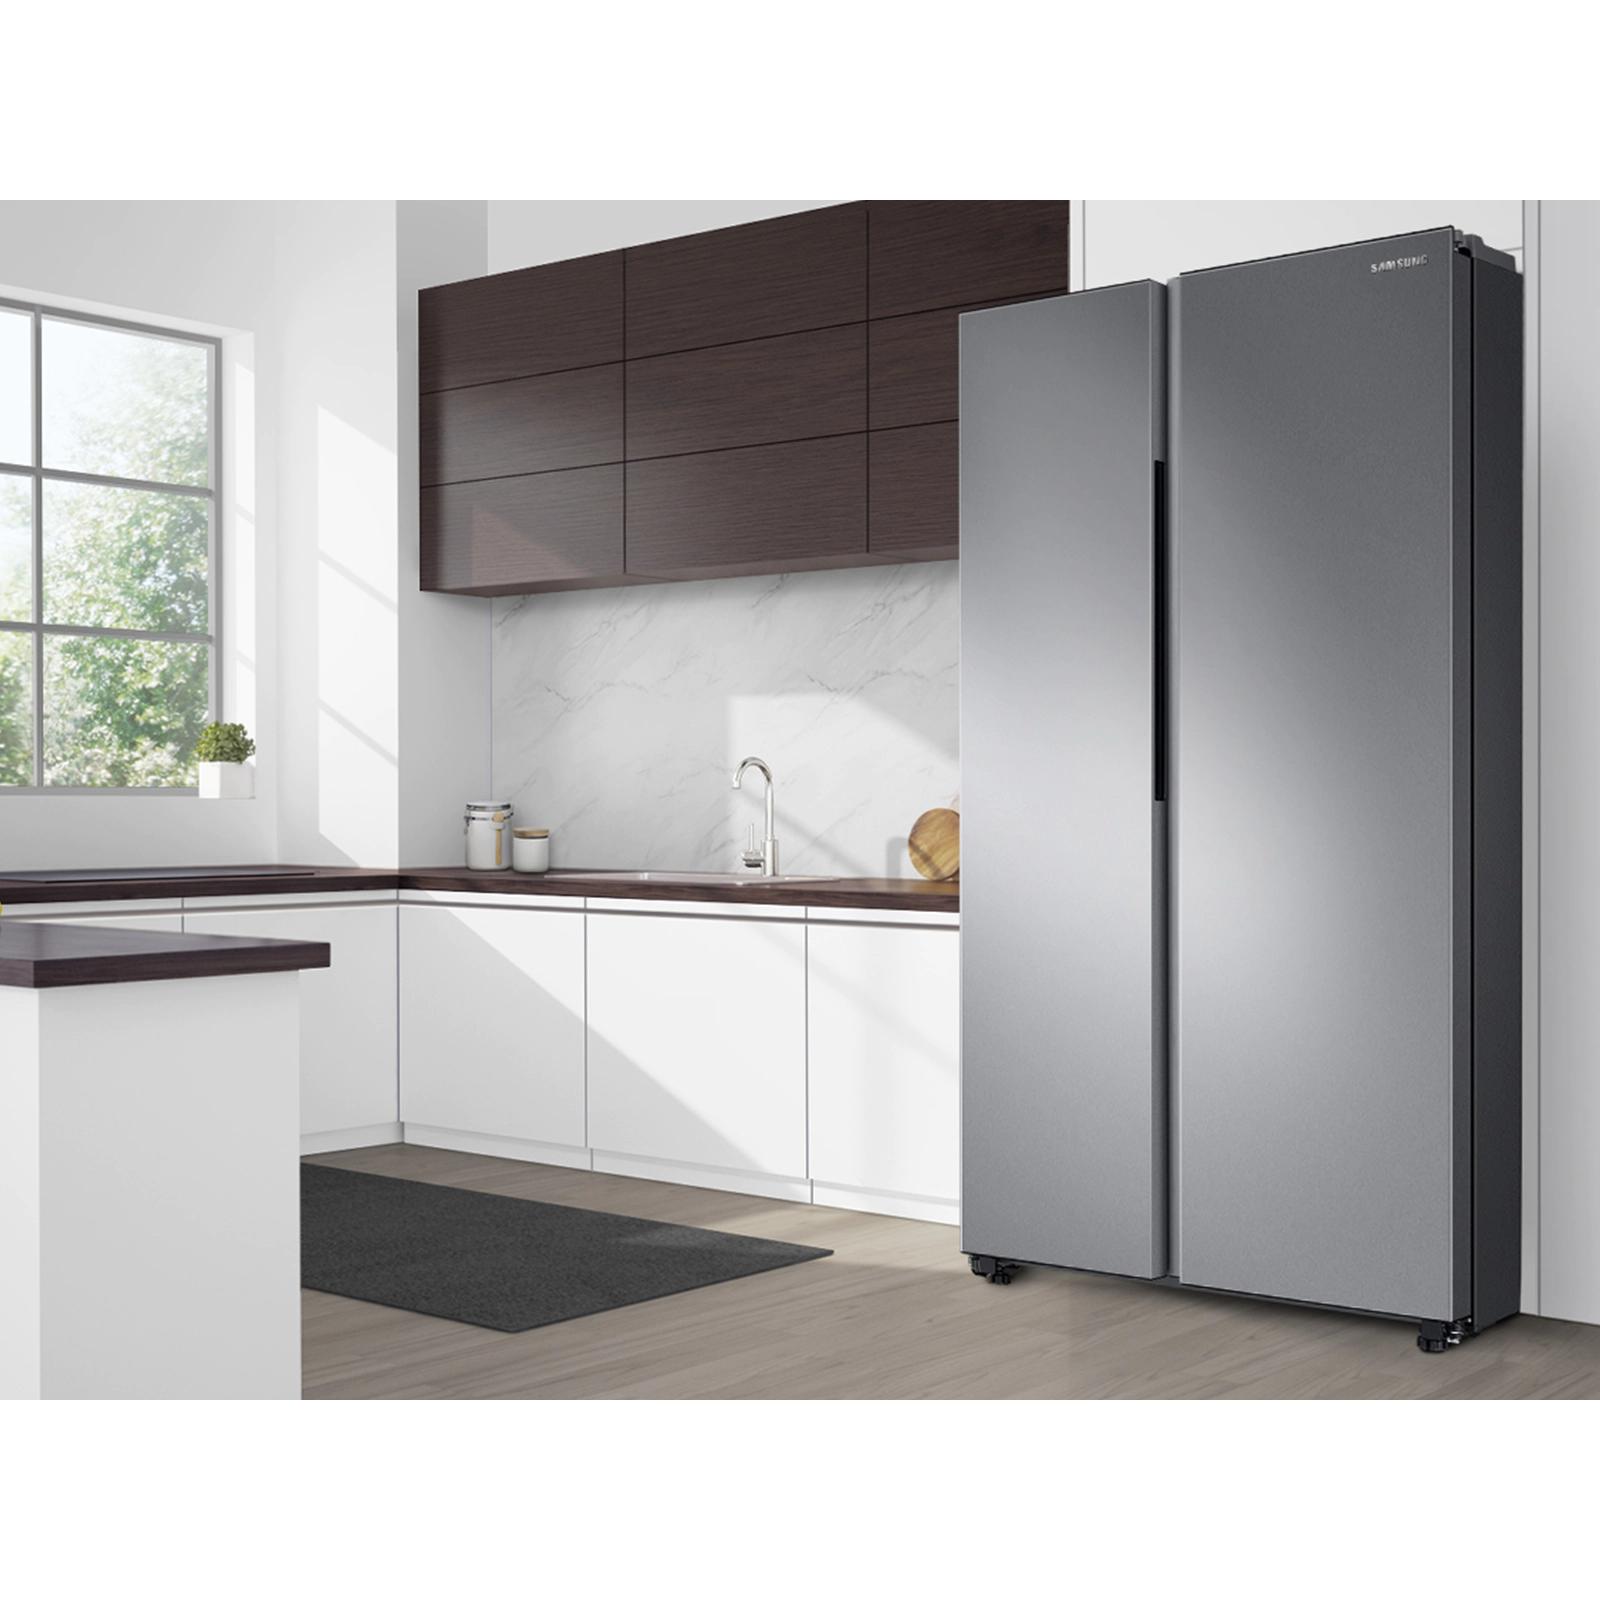 Samsung 36-inch, 28 cu.ft. Freestanding Side-by-Side Refrigerator with In-Door Ice Maker RS28A500ASR/AA